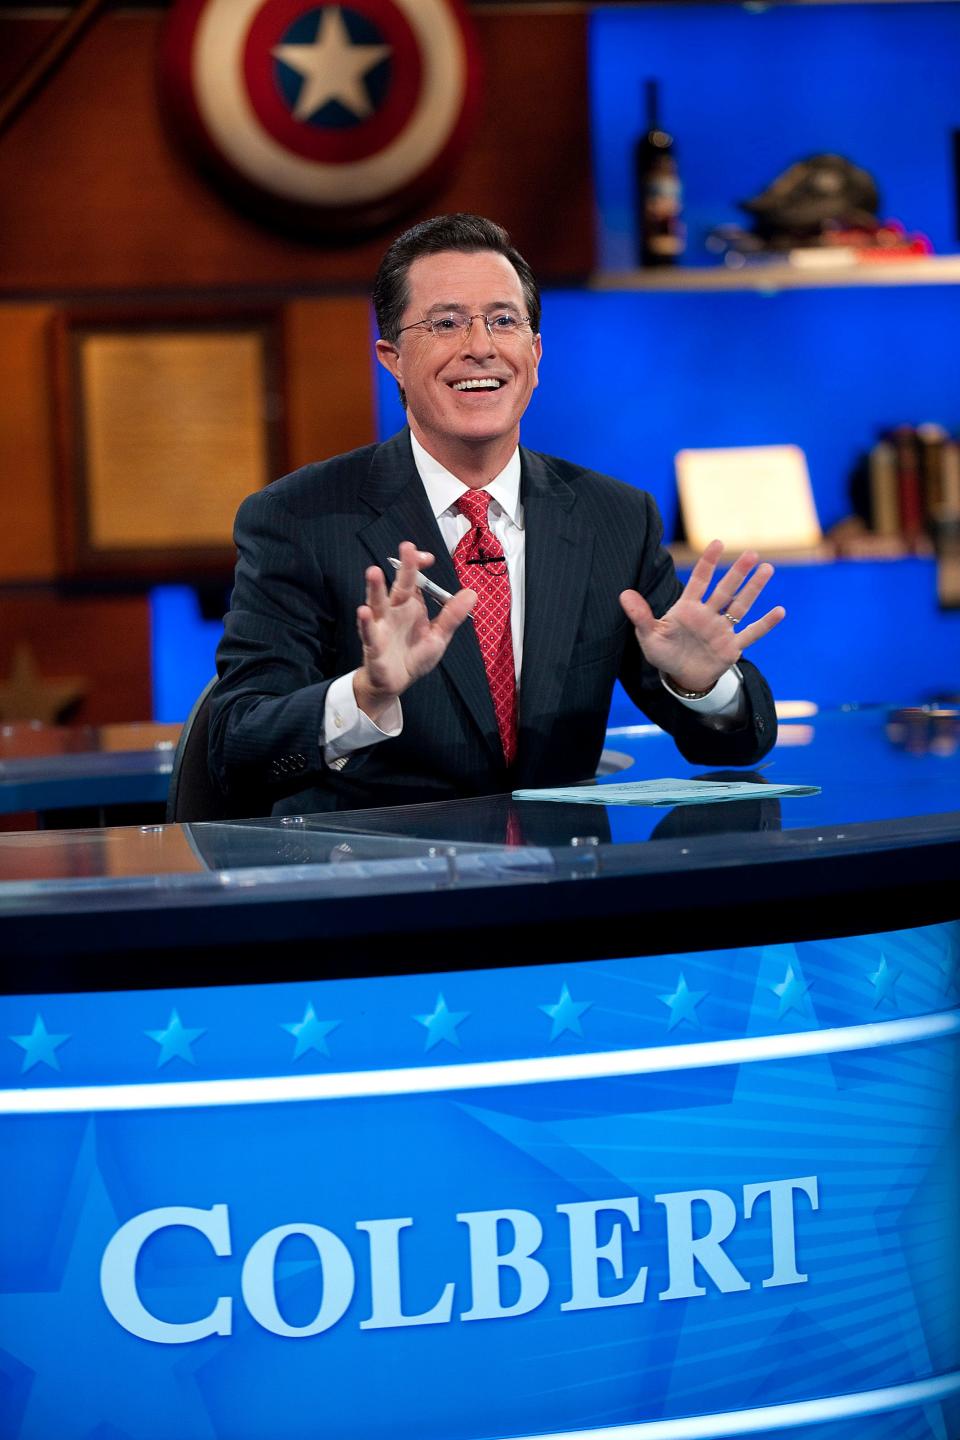 Host Stephen Colbert appears during the "Been There: Won That: The Returnification of the American-Do Troopscapeon" special of The Colbert Report in New York City.